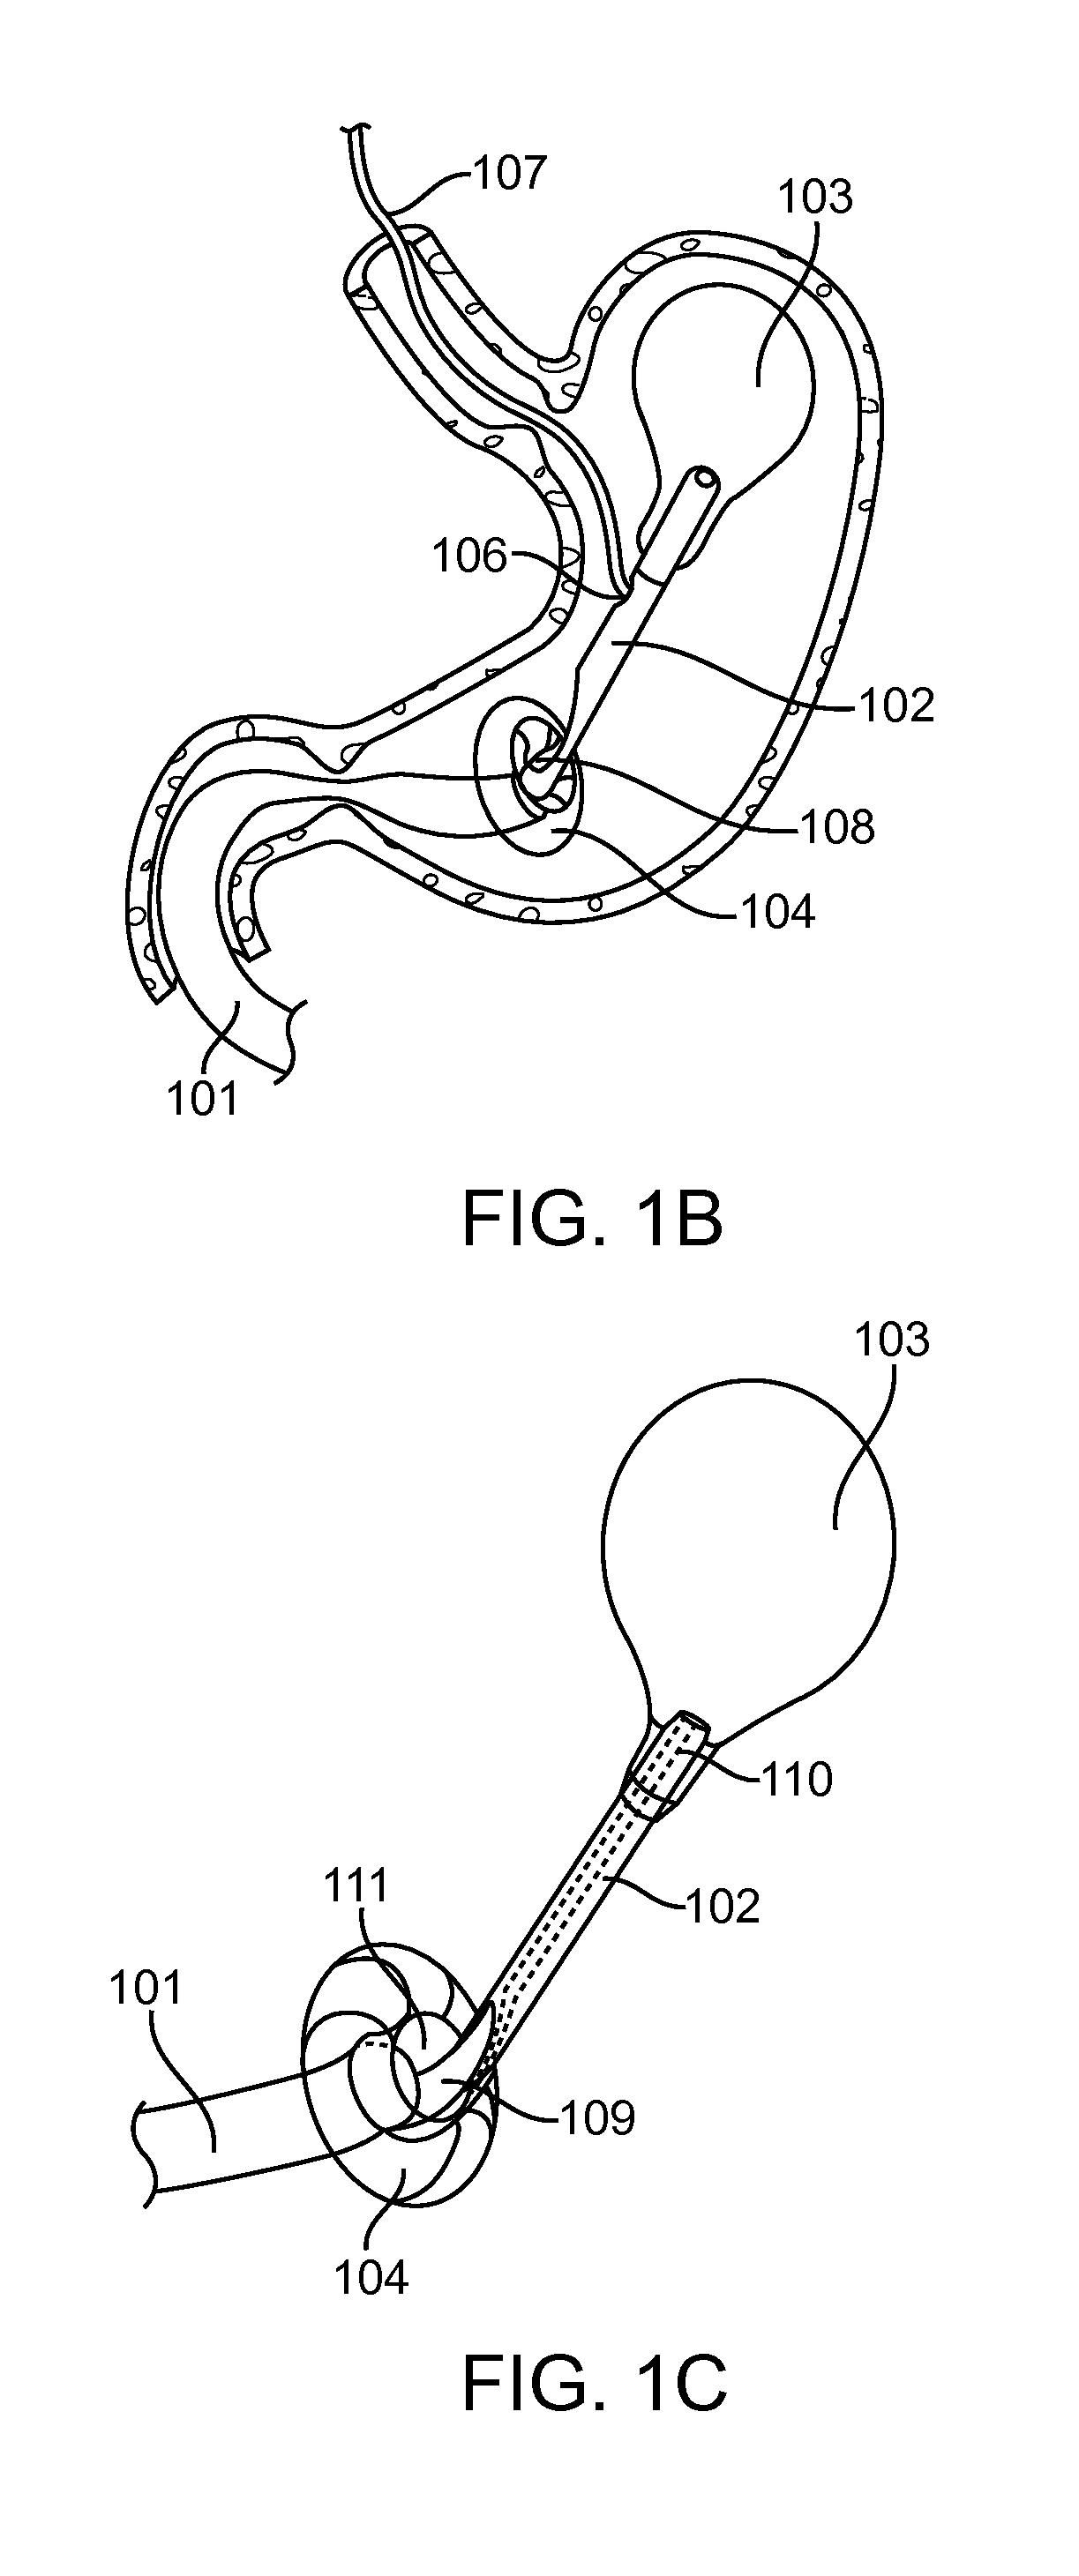 Intragastric implant devices